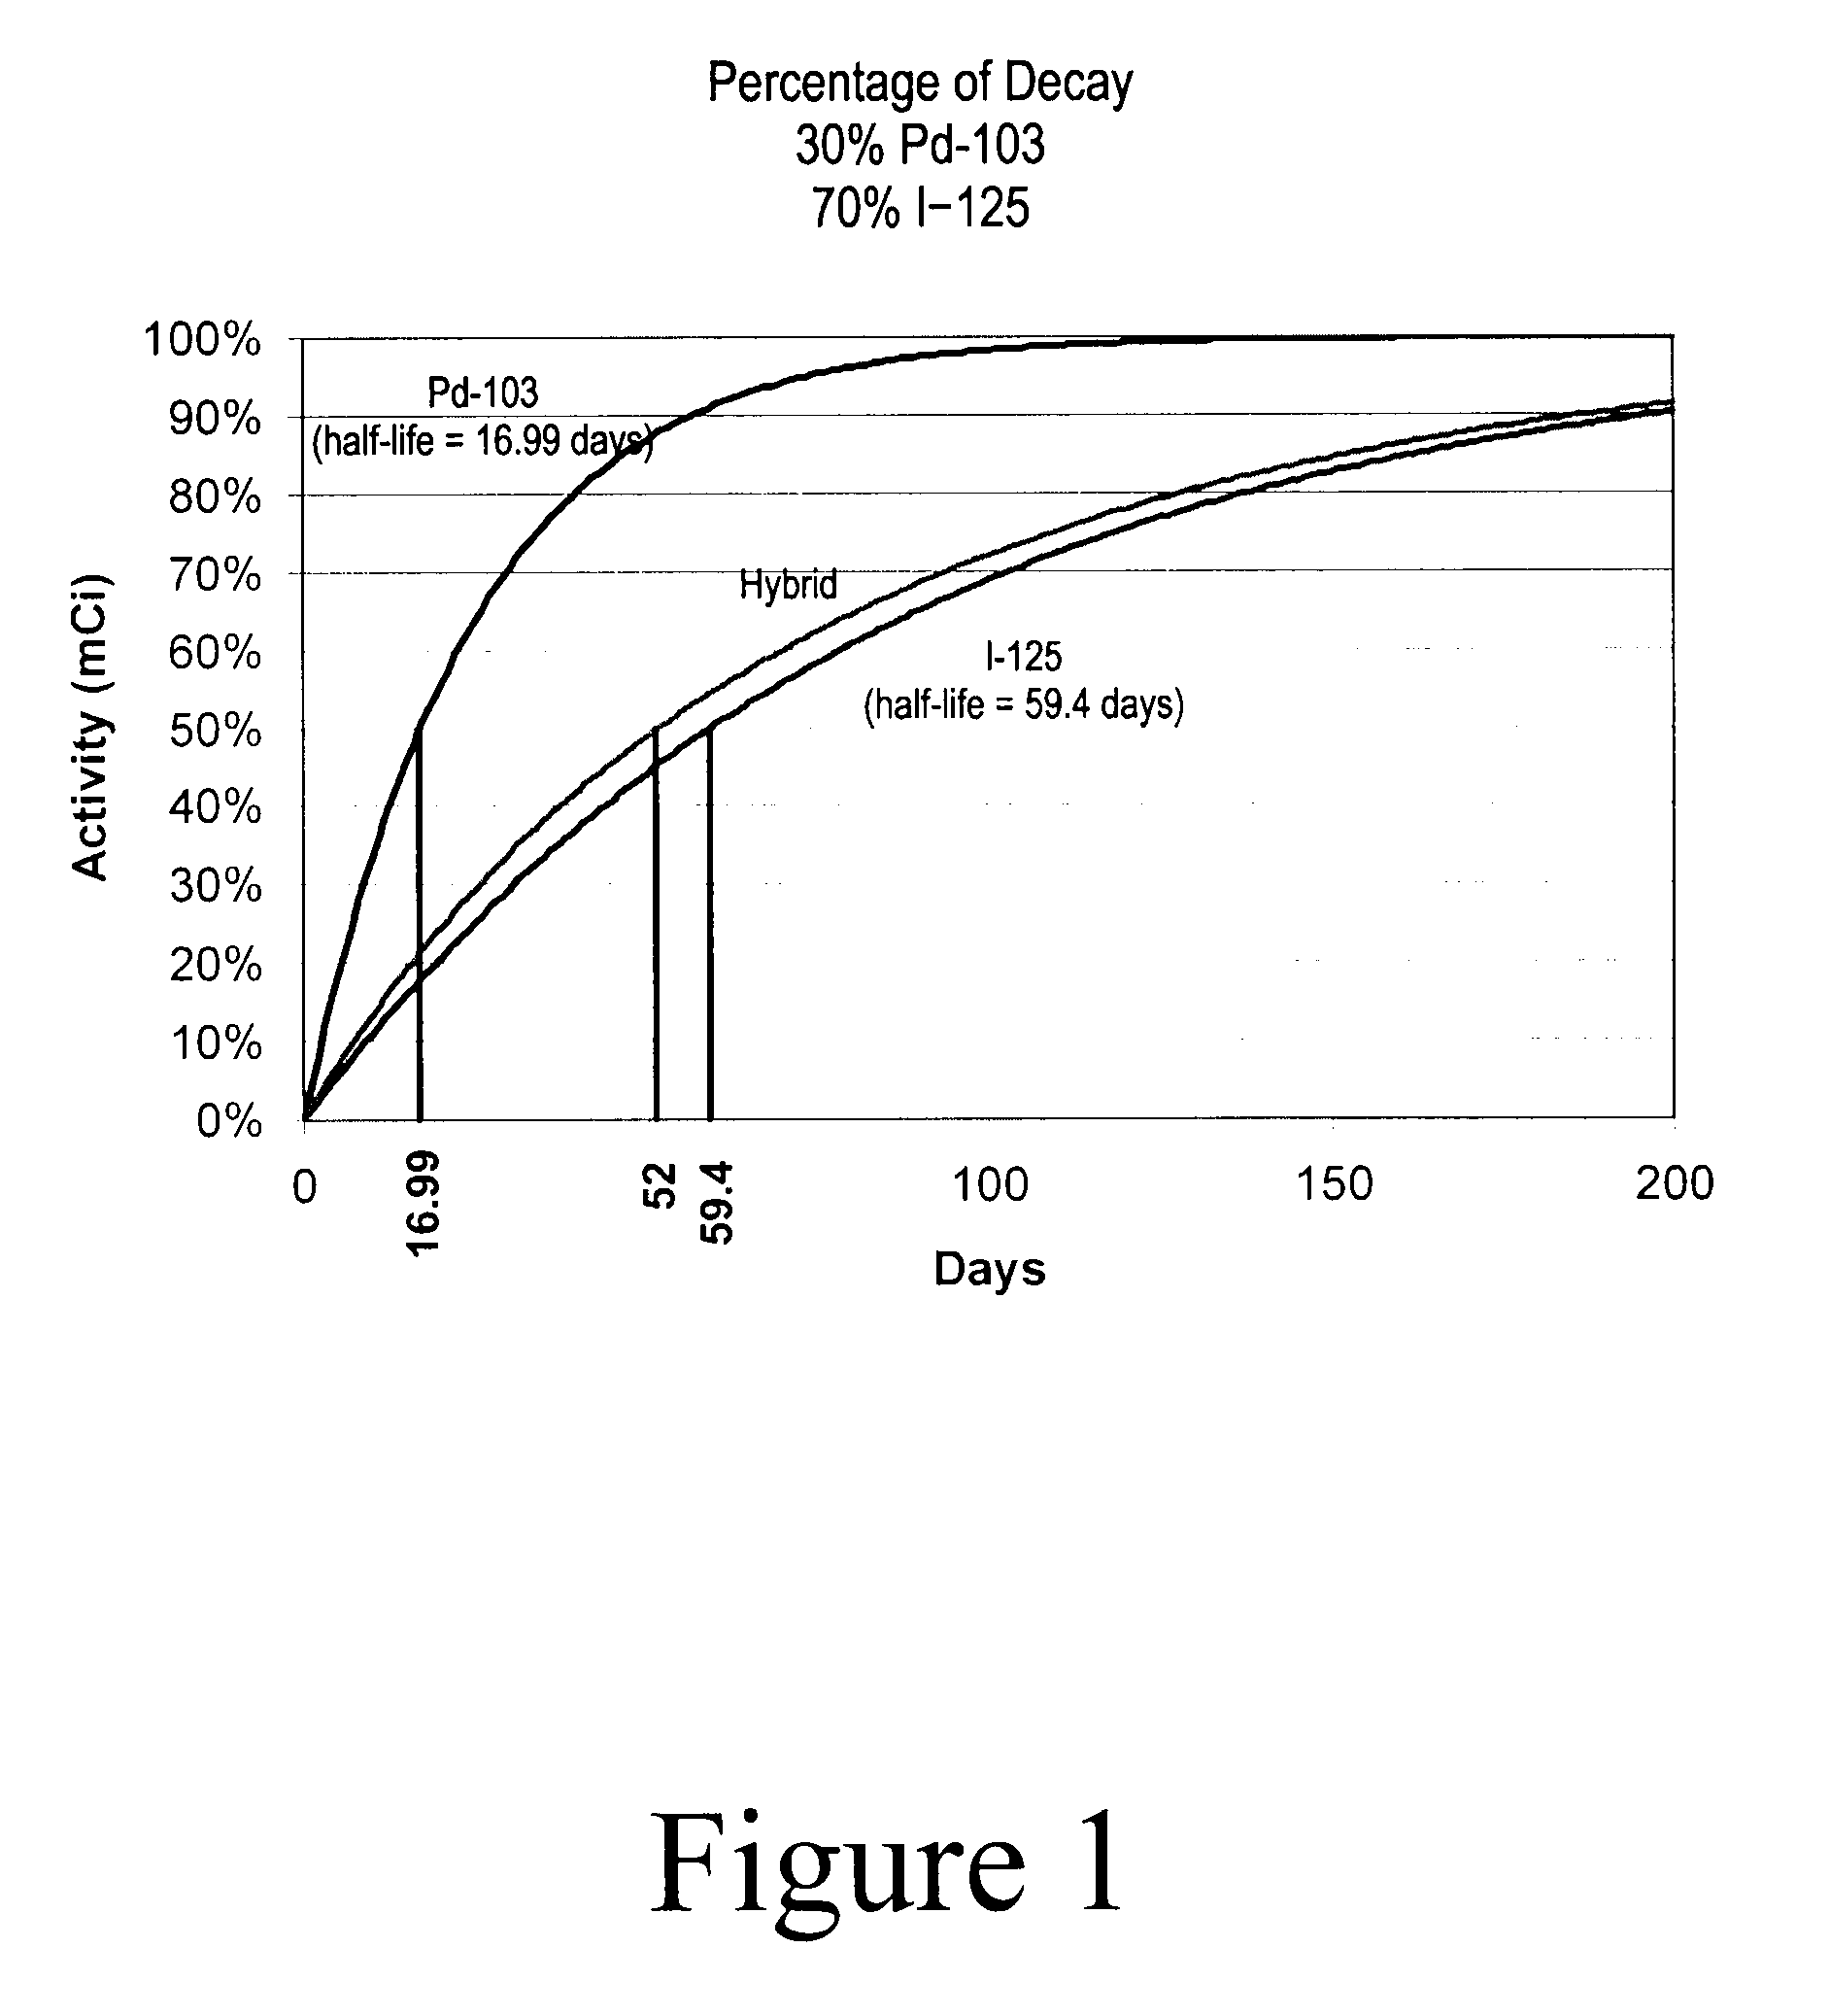 Hybrid Source Containing Multi-Radionuclides for Use in Radiation Therapy